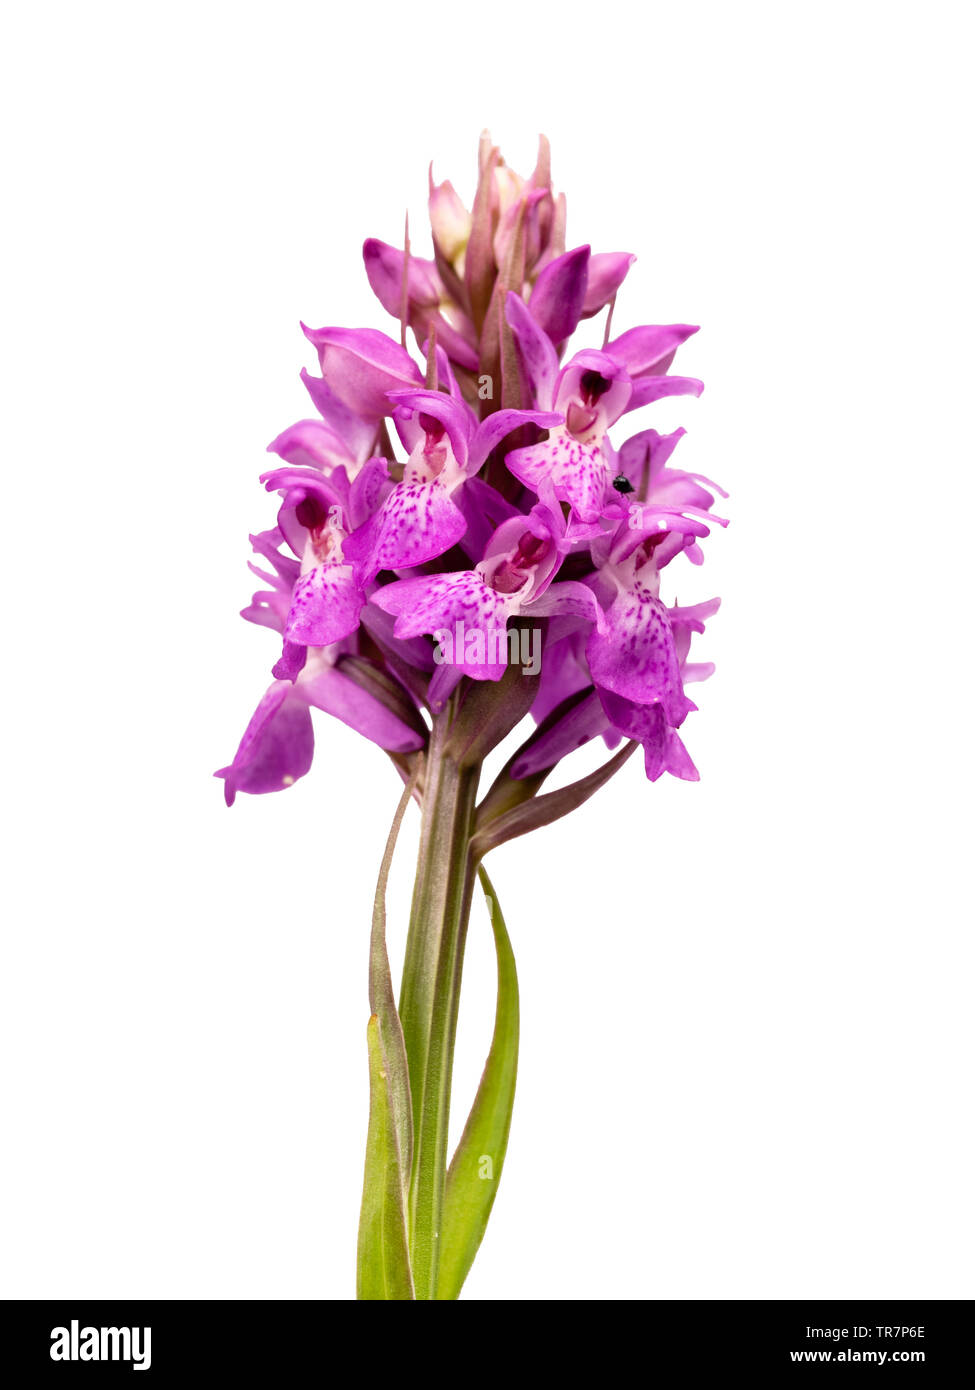 Early summer flower spike of the UK native wildflower, Dactylorhiza praetermissa, the Southern Marsh Orchid on a white background Stock Photo